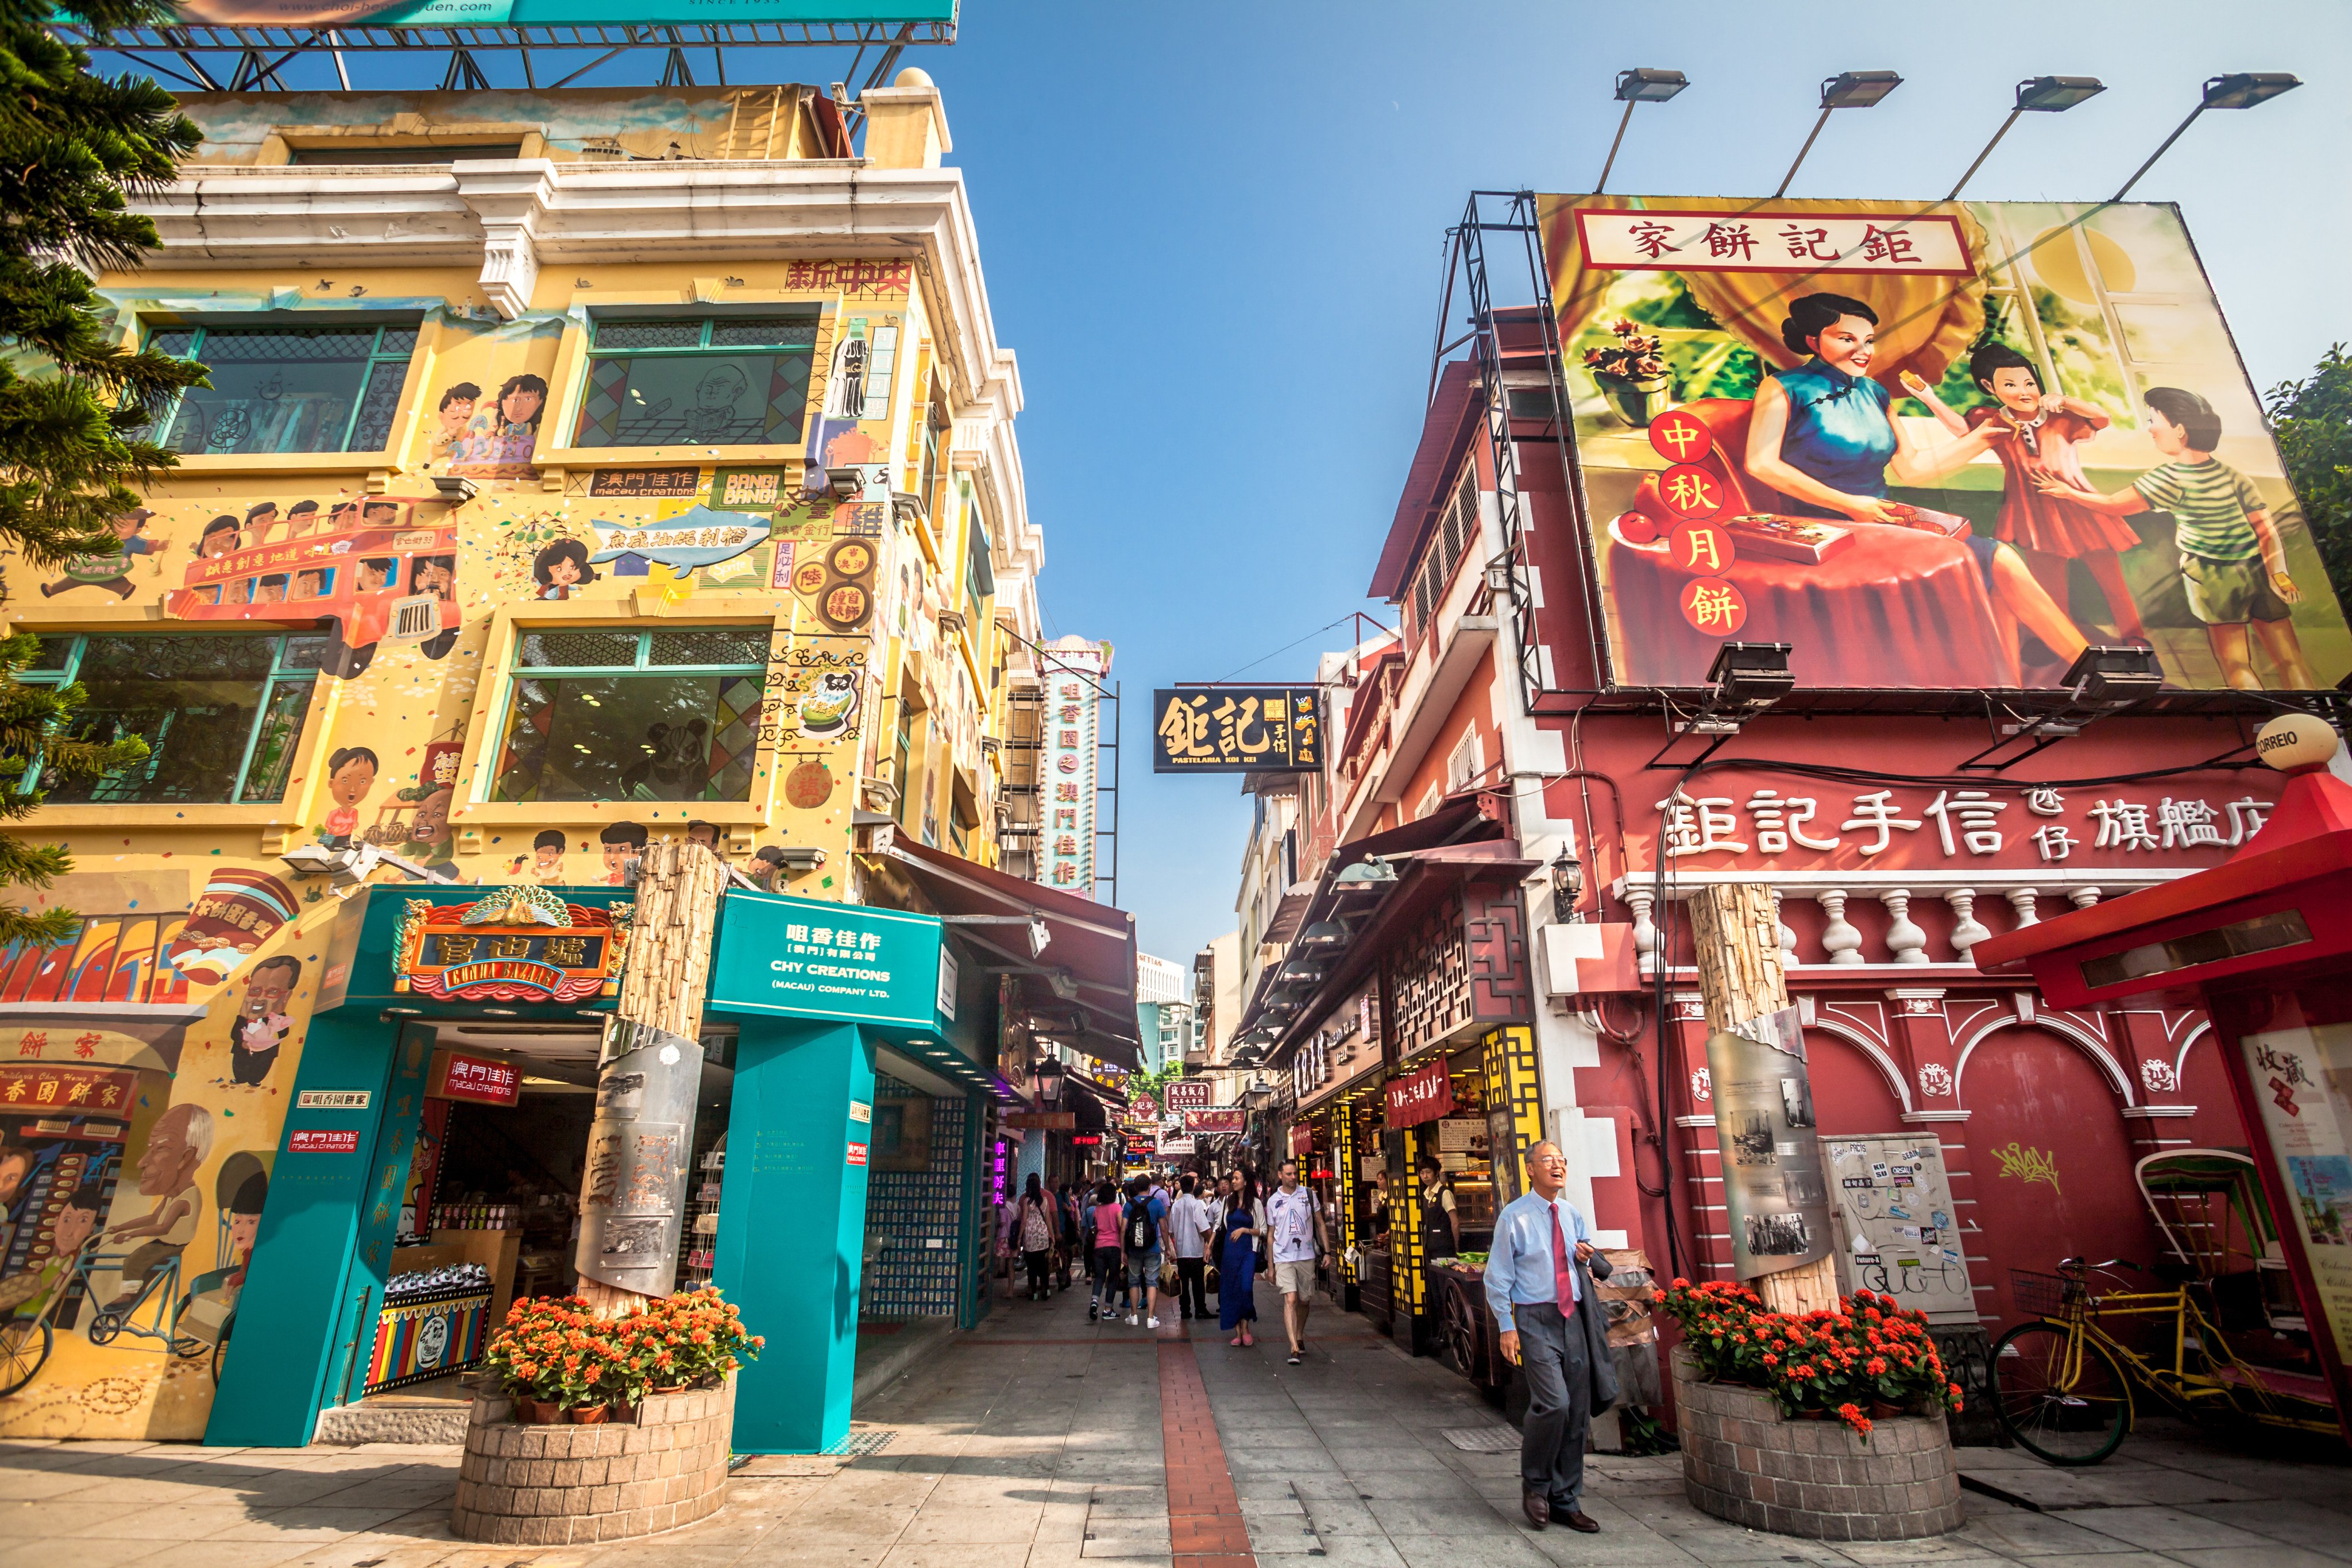 Tourists and shoppers walking along Food Street in Macau on September 19, 2015. Photo: Shutterstock.